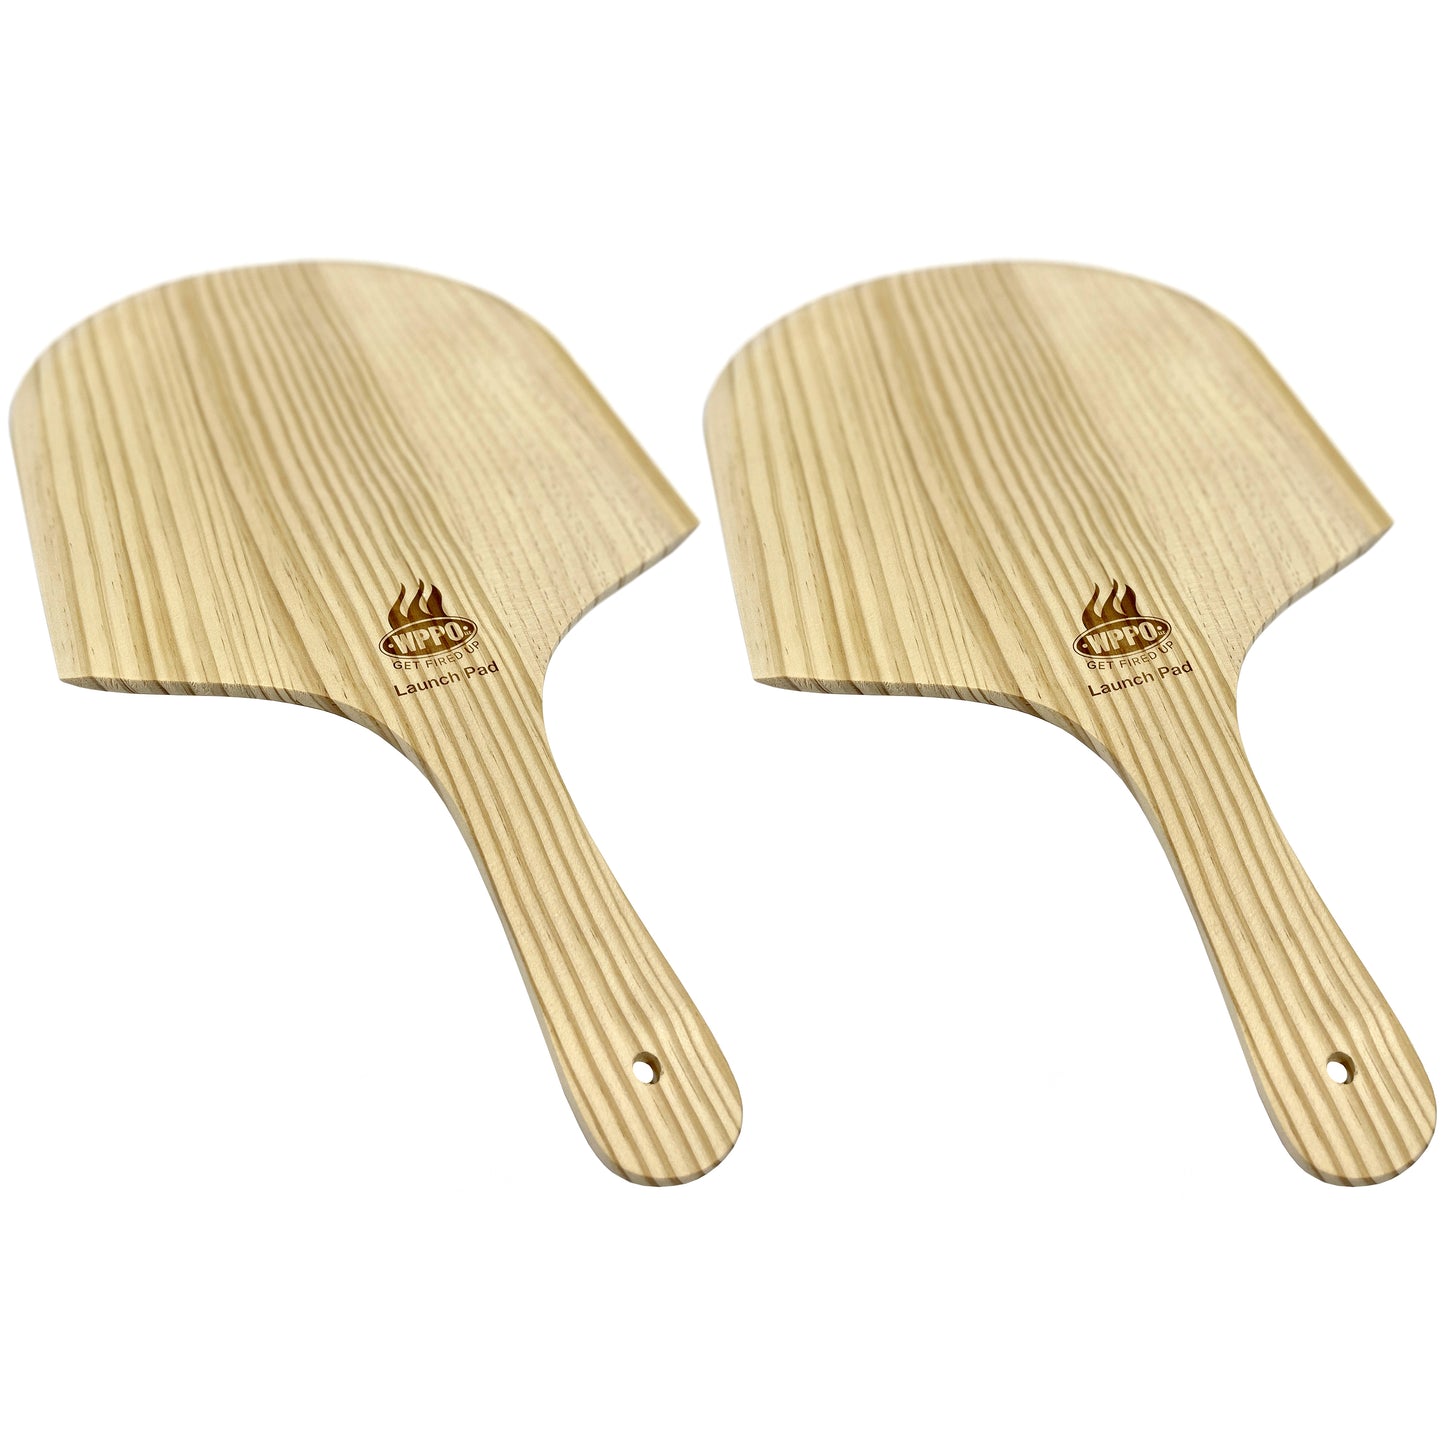 12” Square New Zealand Wooden Pizza Peel 2 pack